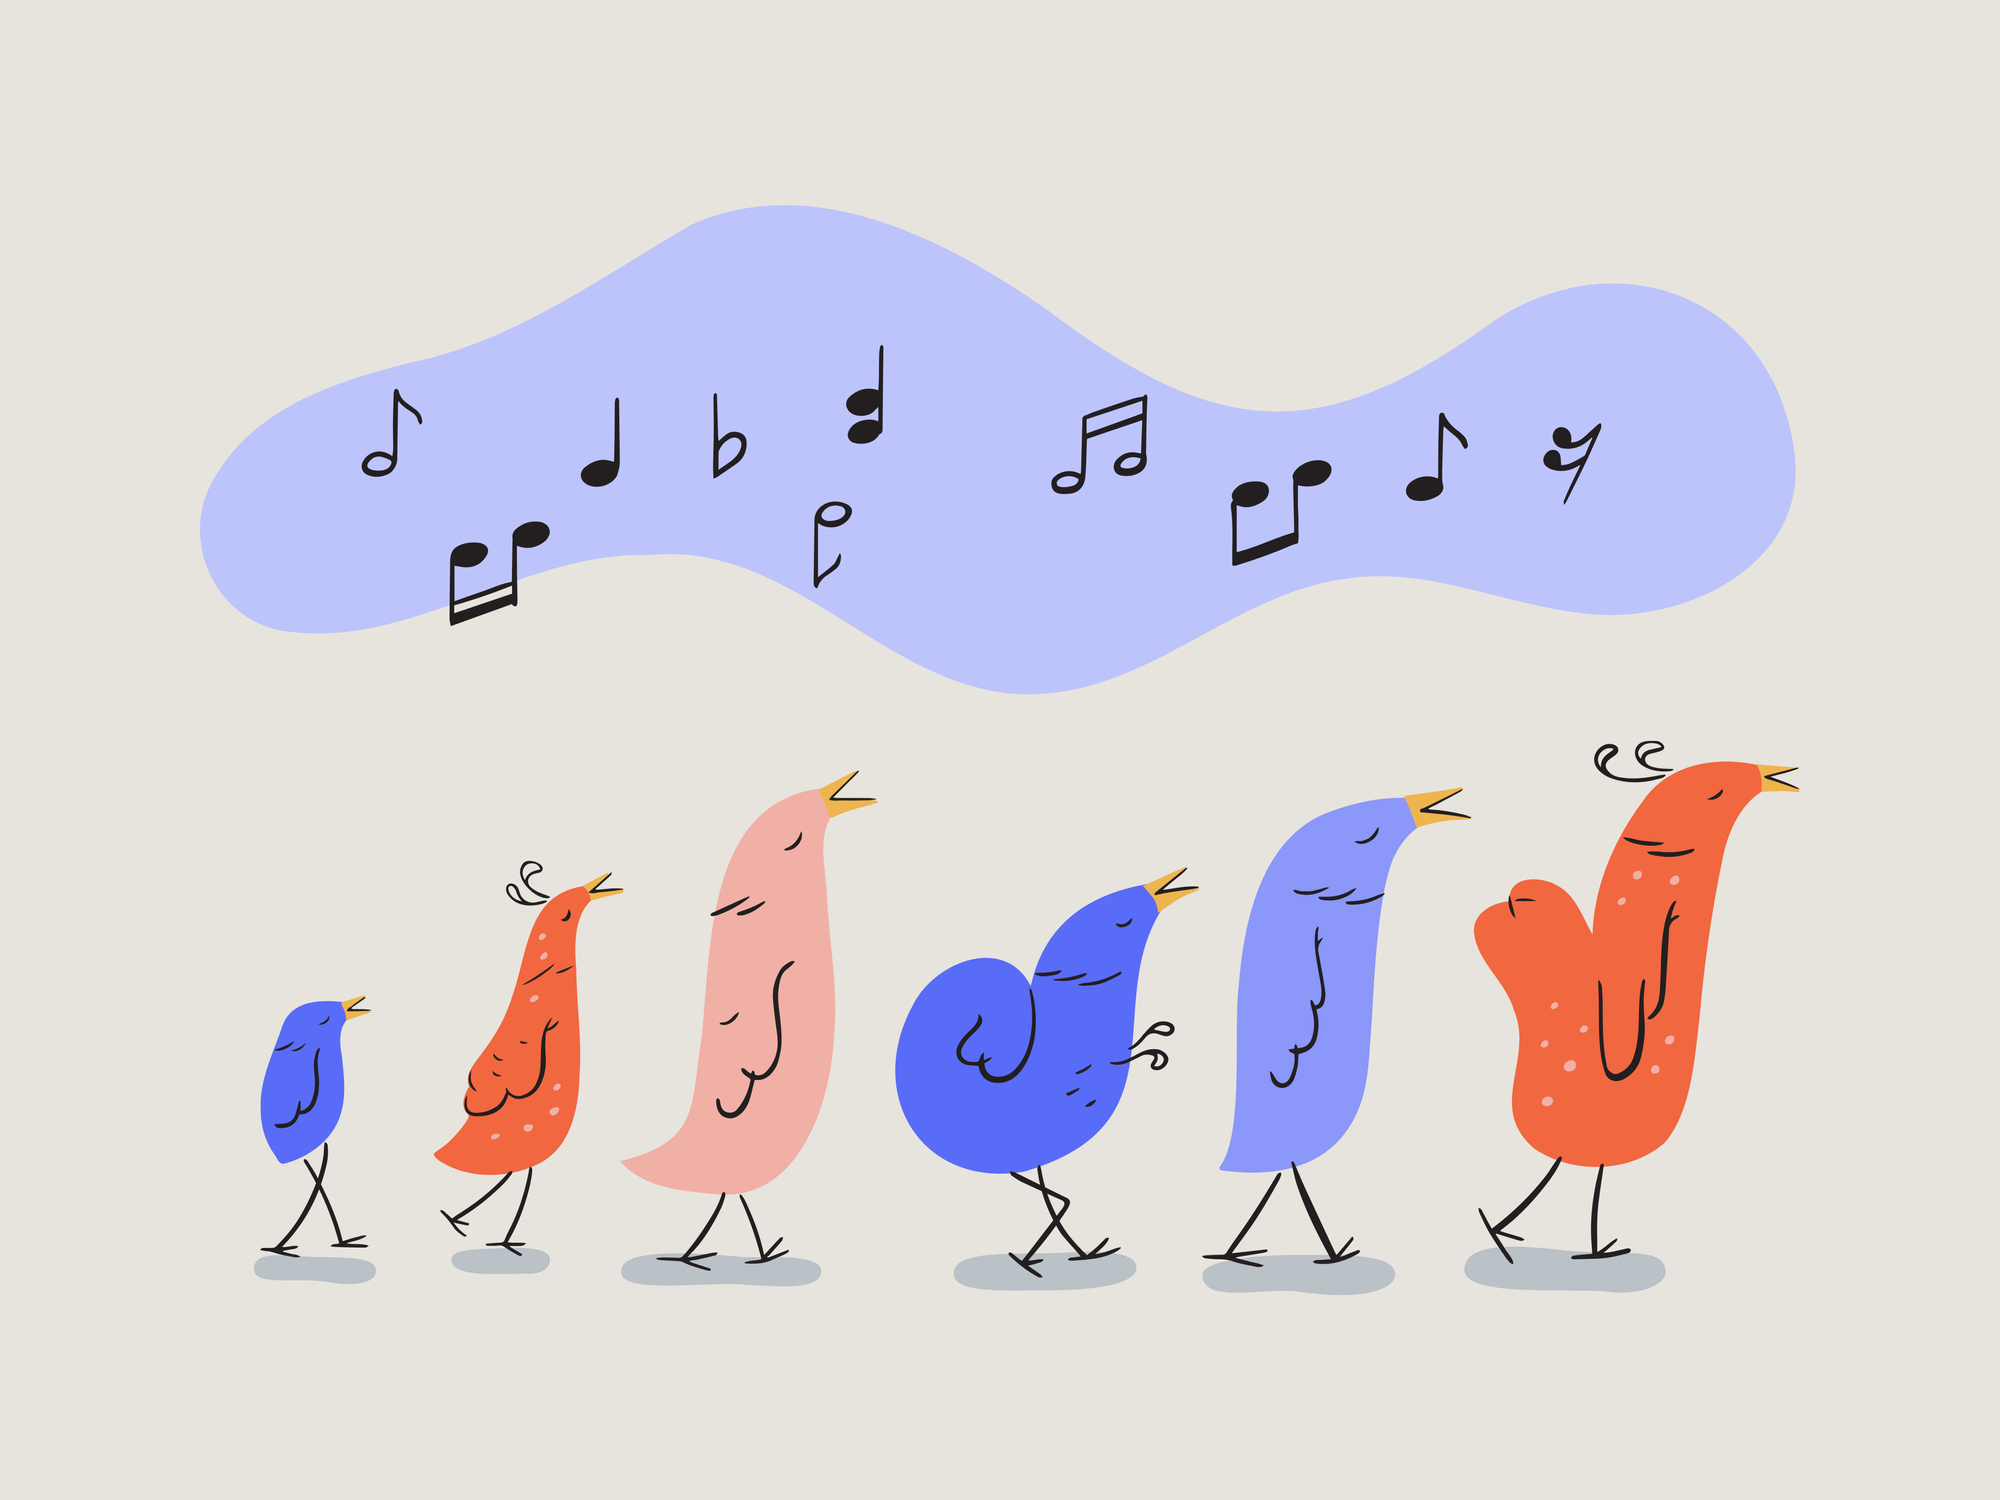 Illustration of a flock of cute cartoon birds singing while walking in a line.